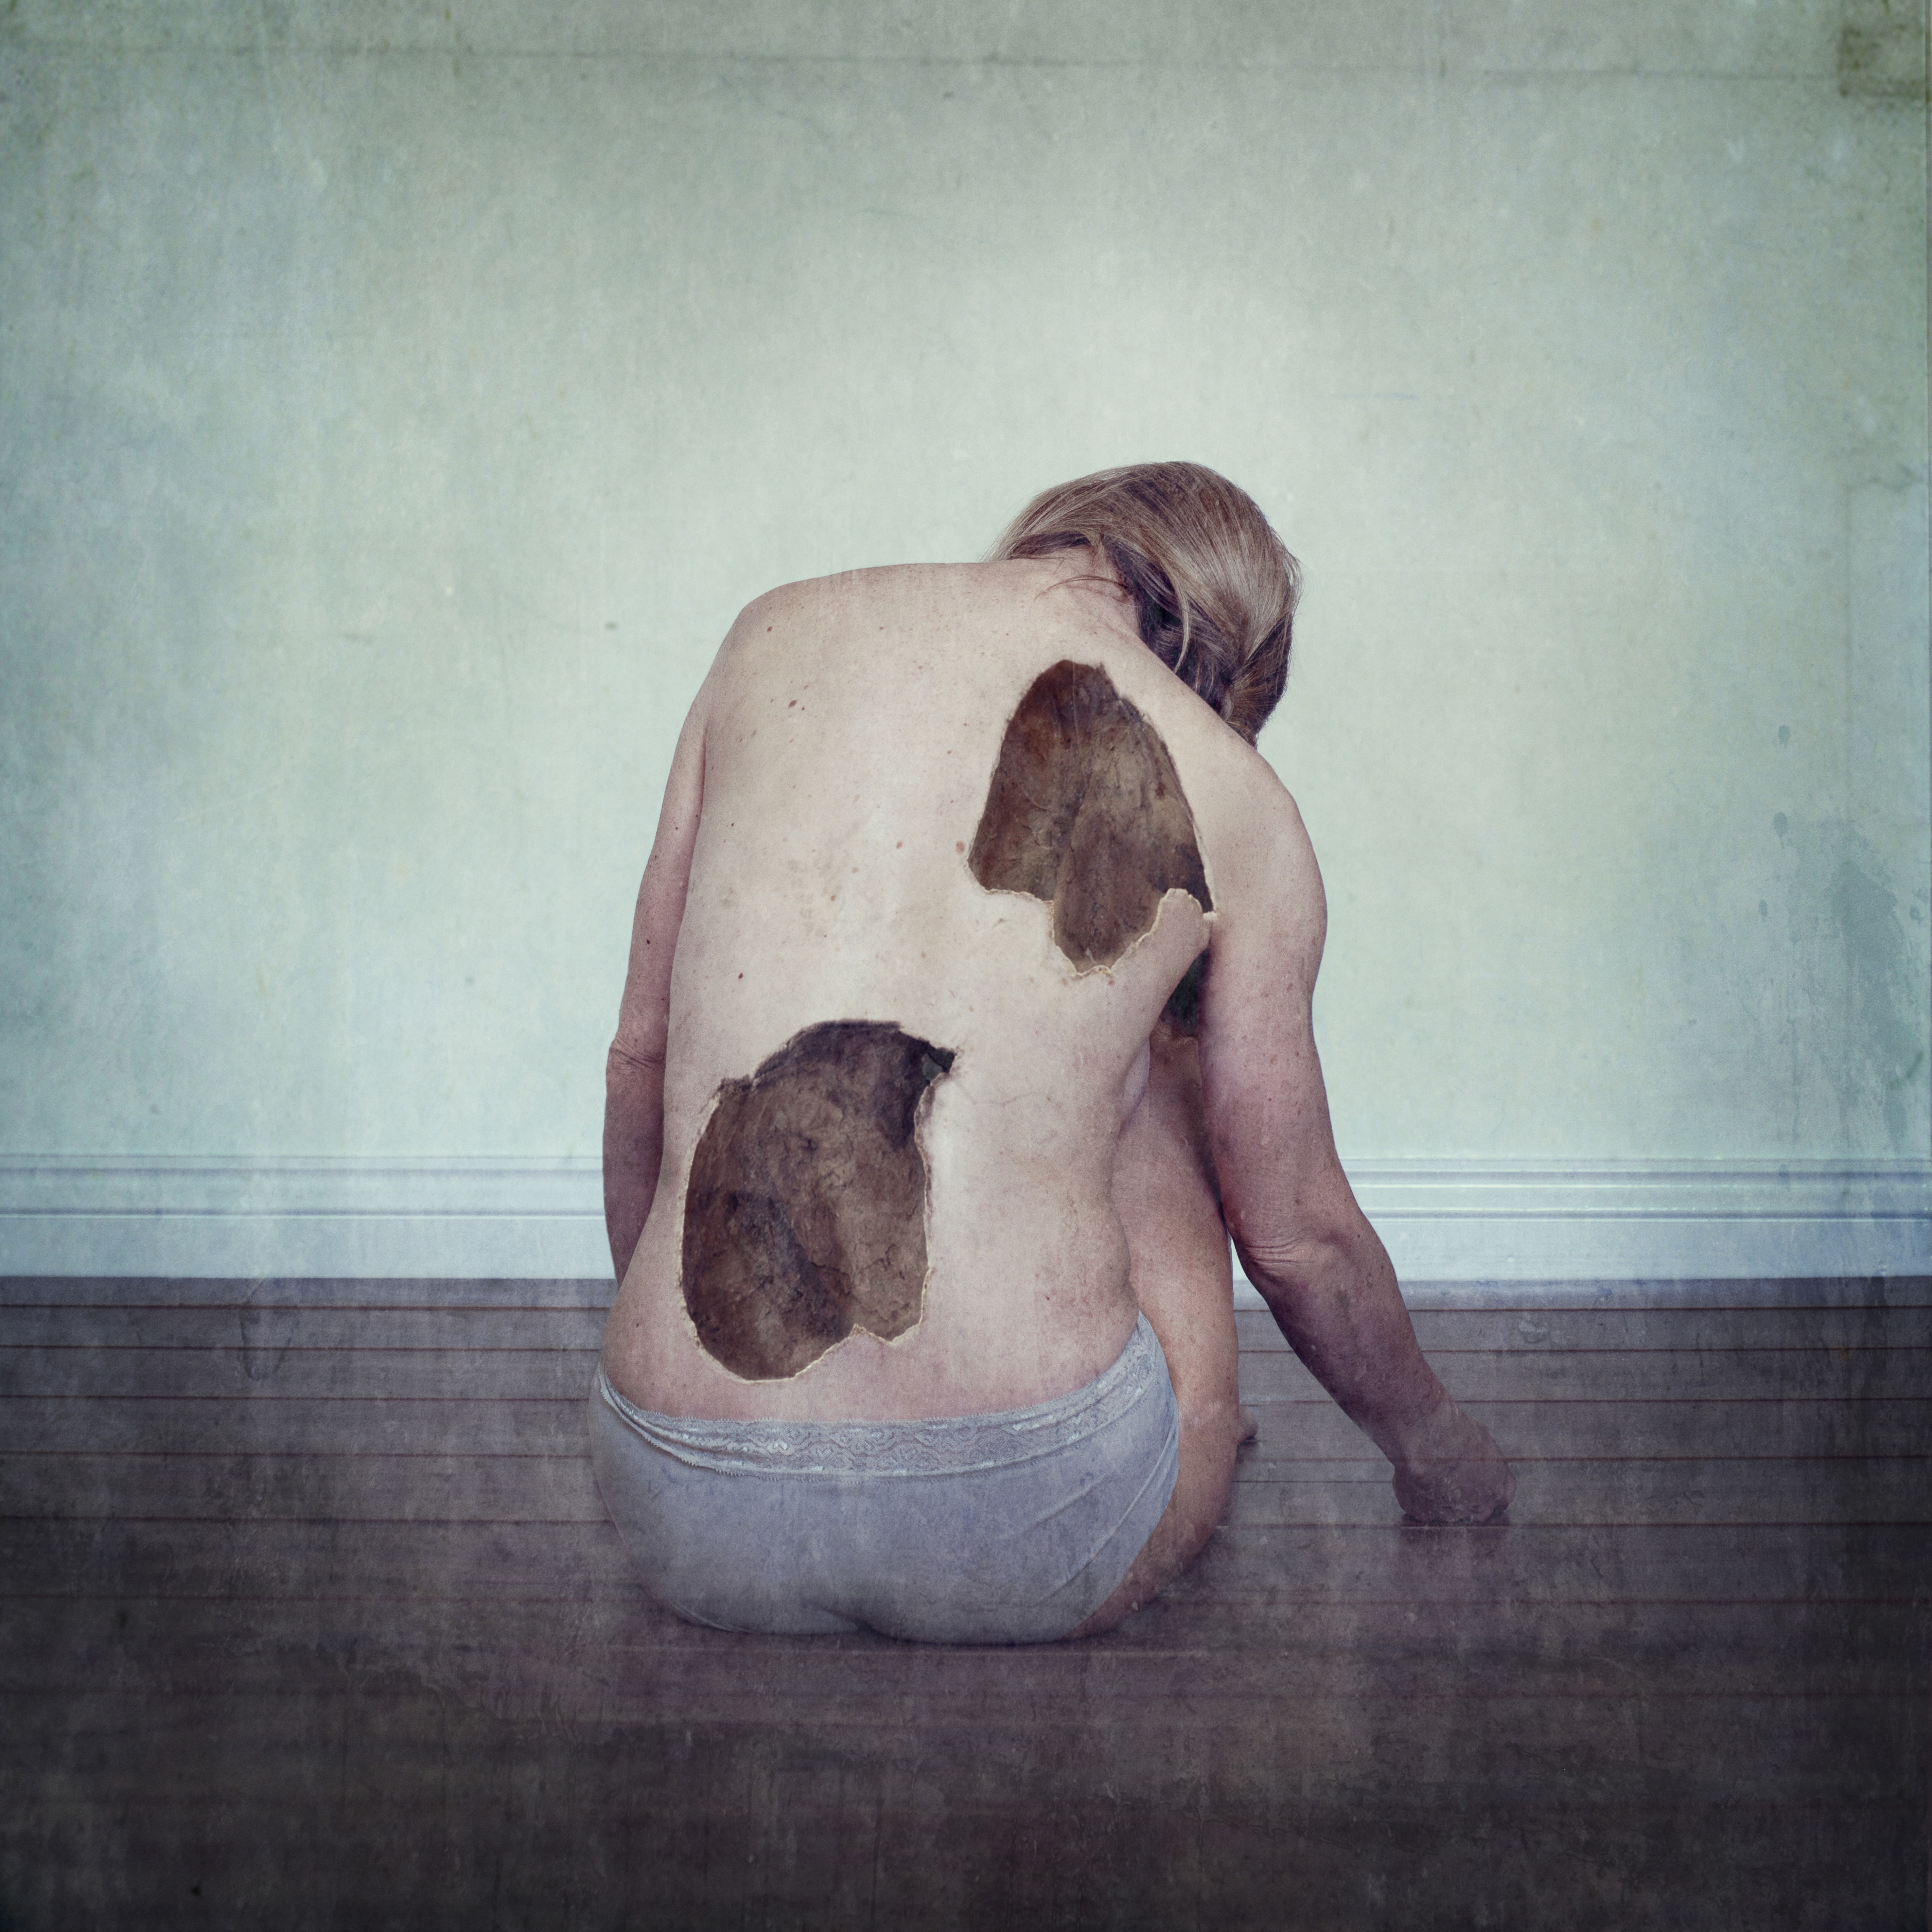 Woman sits on floor with her back facing. there are two larges holes in her back.